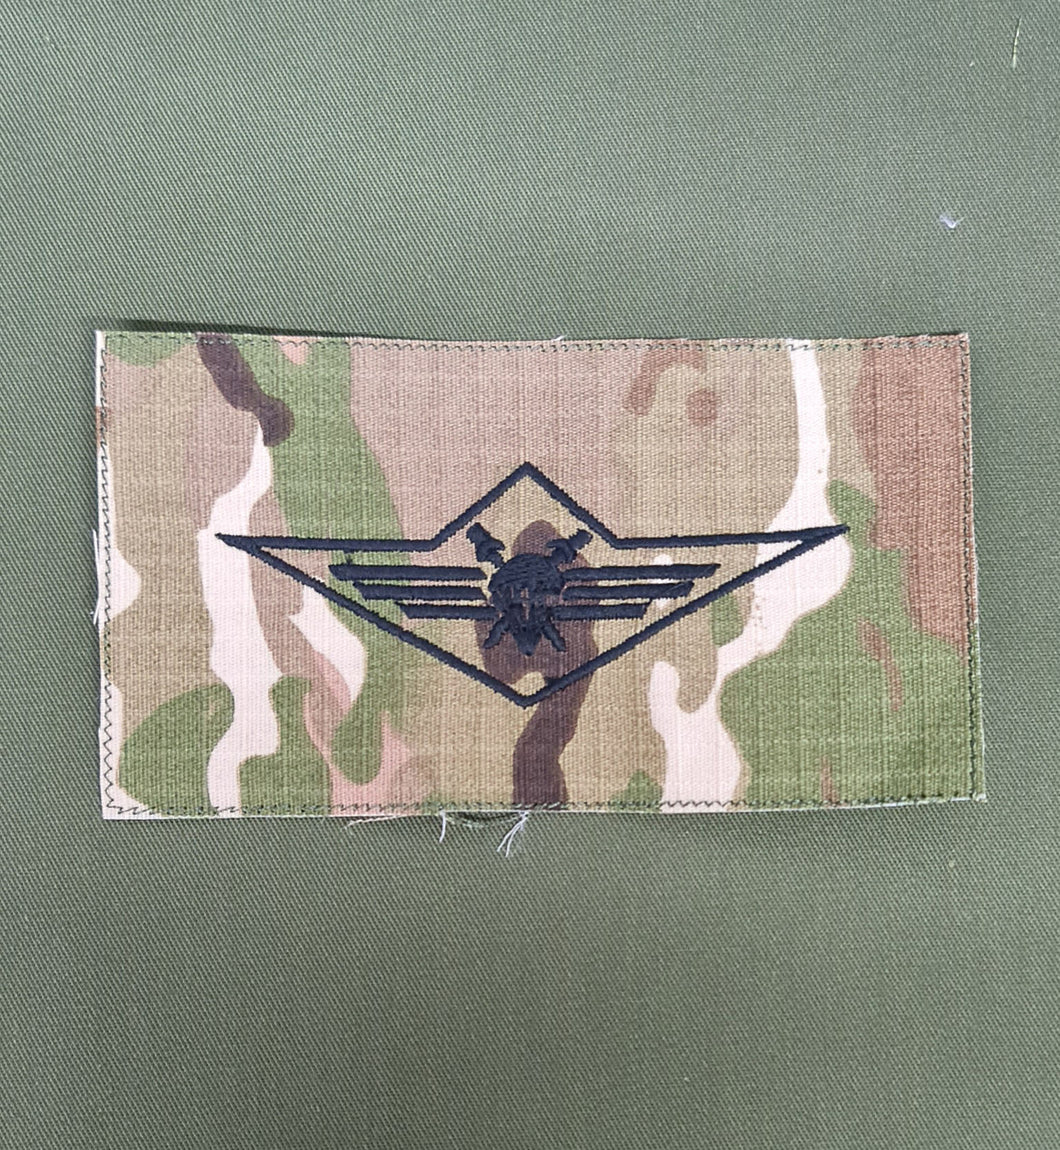 Bulgaria / Bulgarian - US (OCP, Full Size) Ripstop multicam fabric embroidered Parachutist wing jump patch / badge